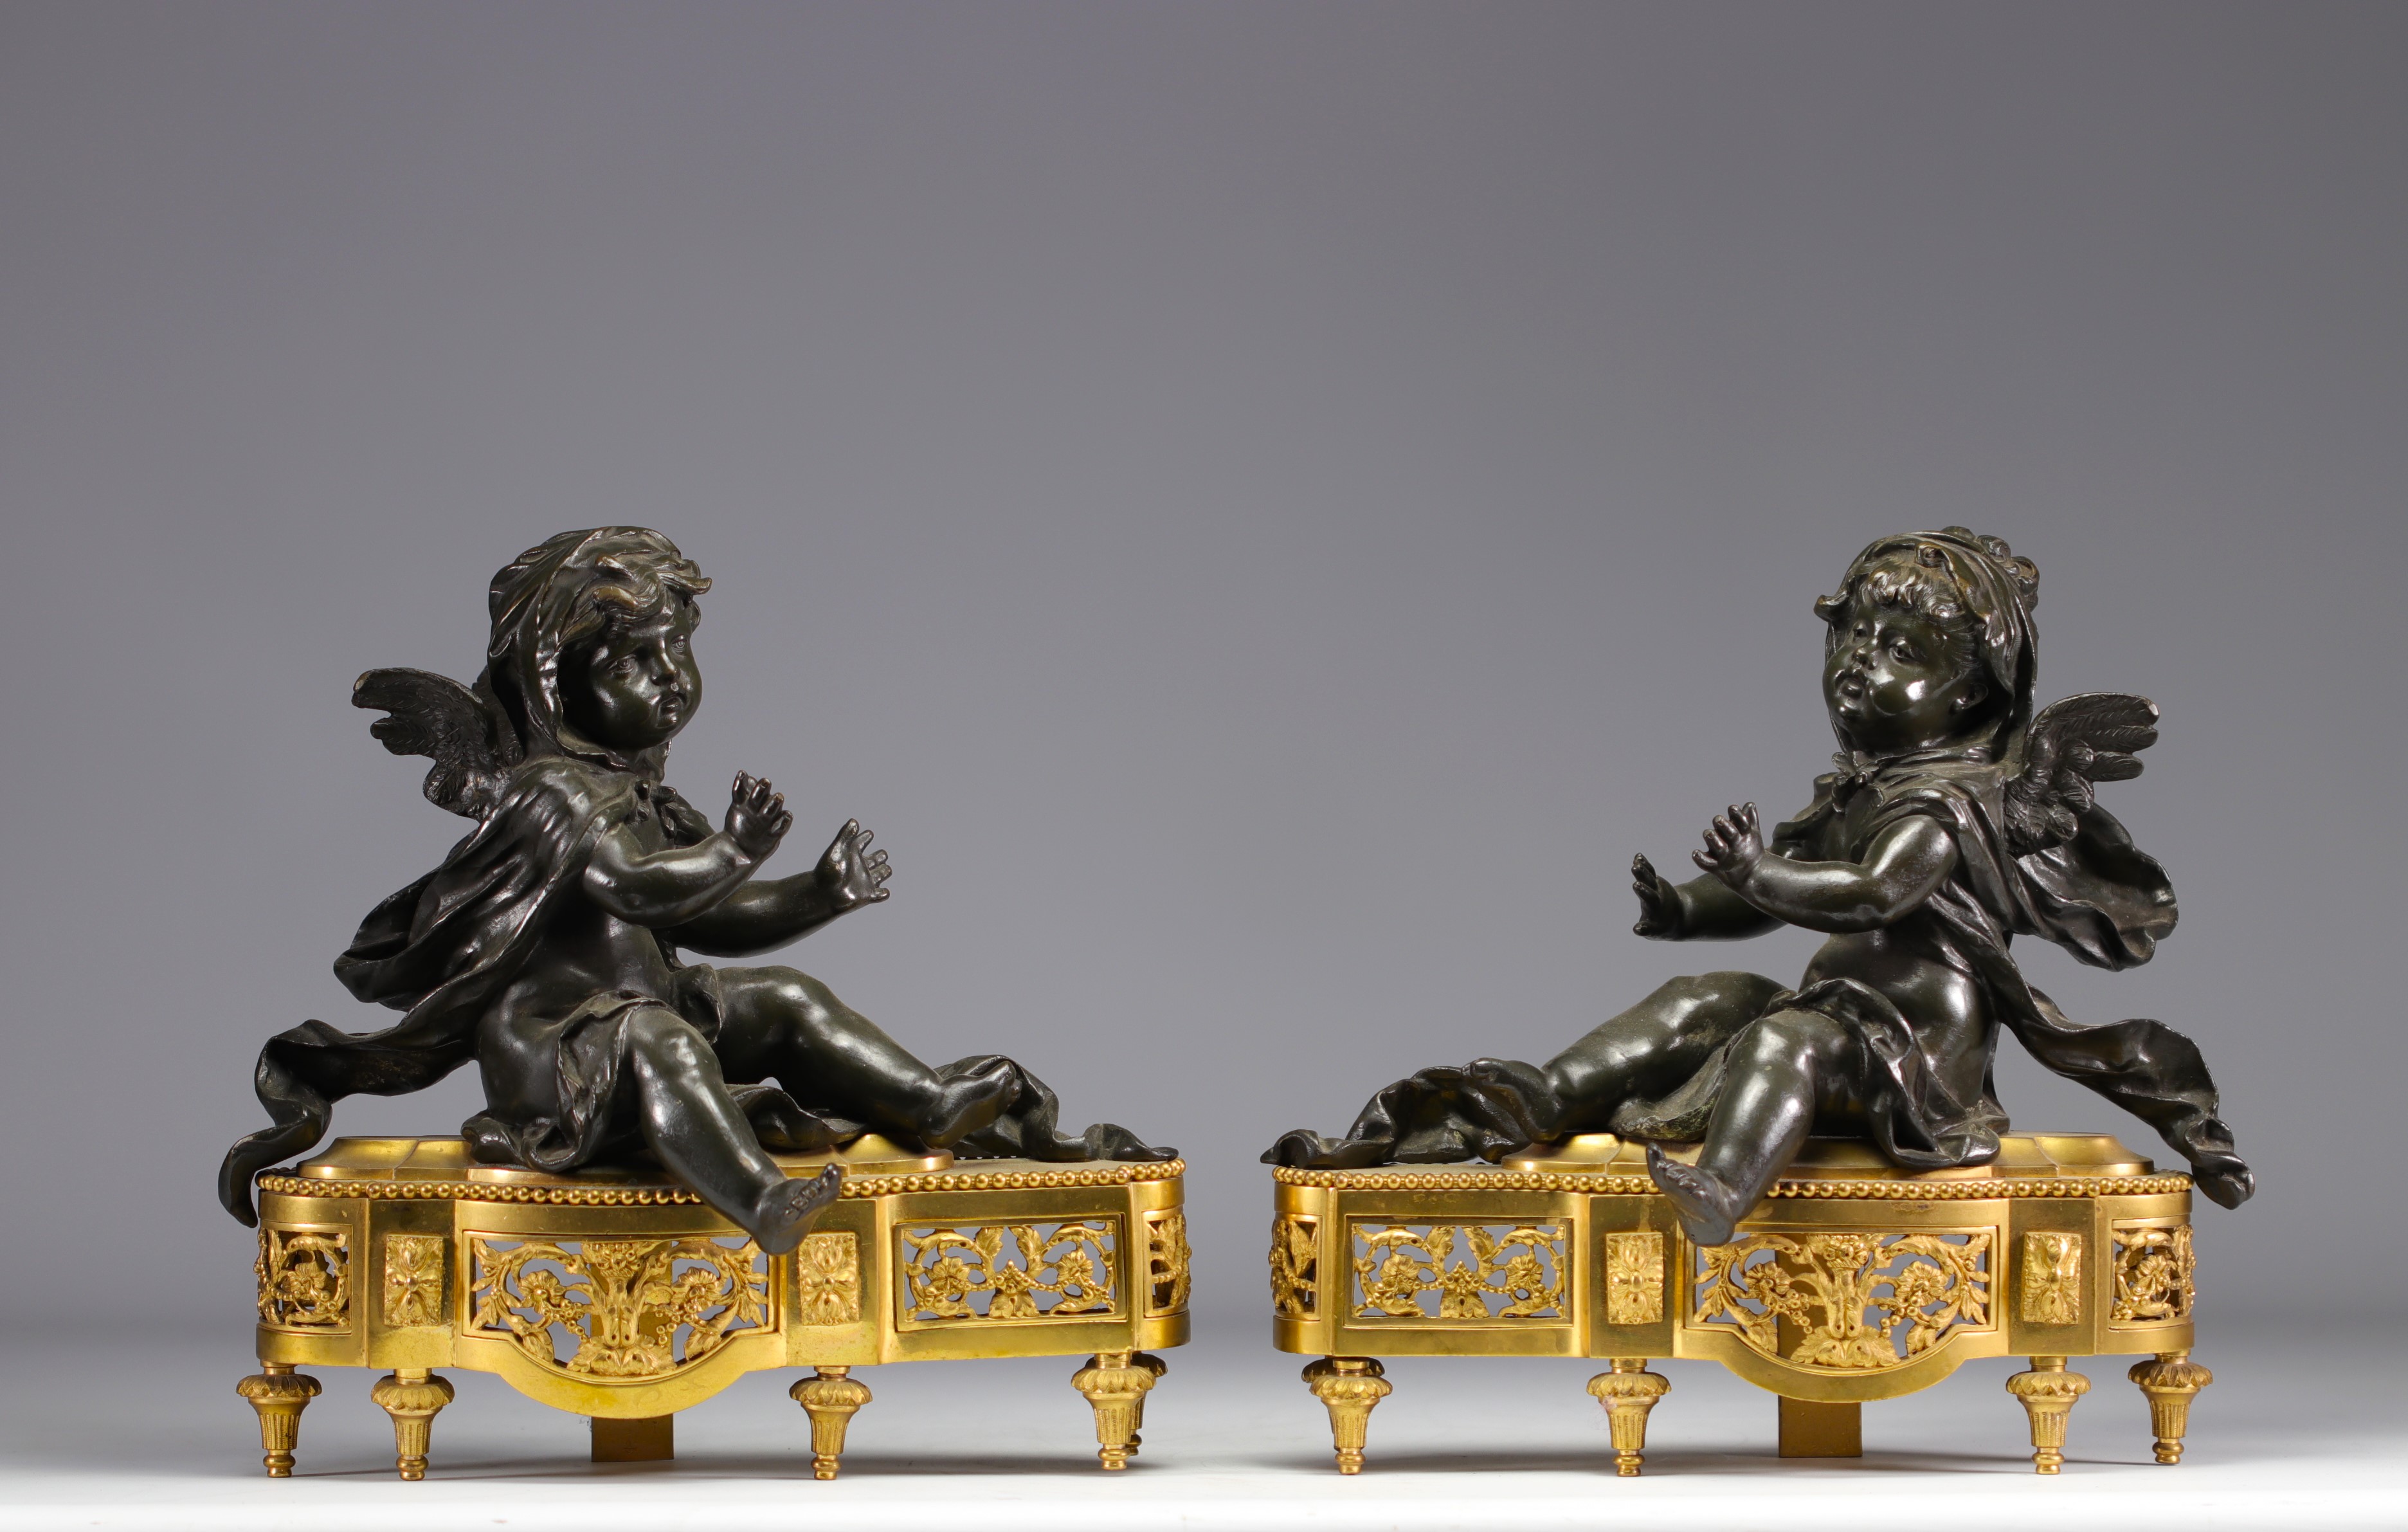 (2) Pair of Louis XV-style bronze andirons with brown patina and putti decoration on a gilded bronze